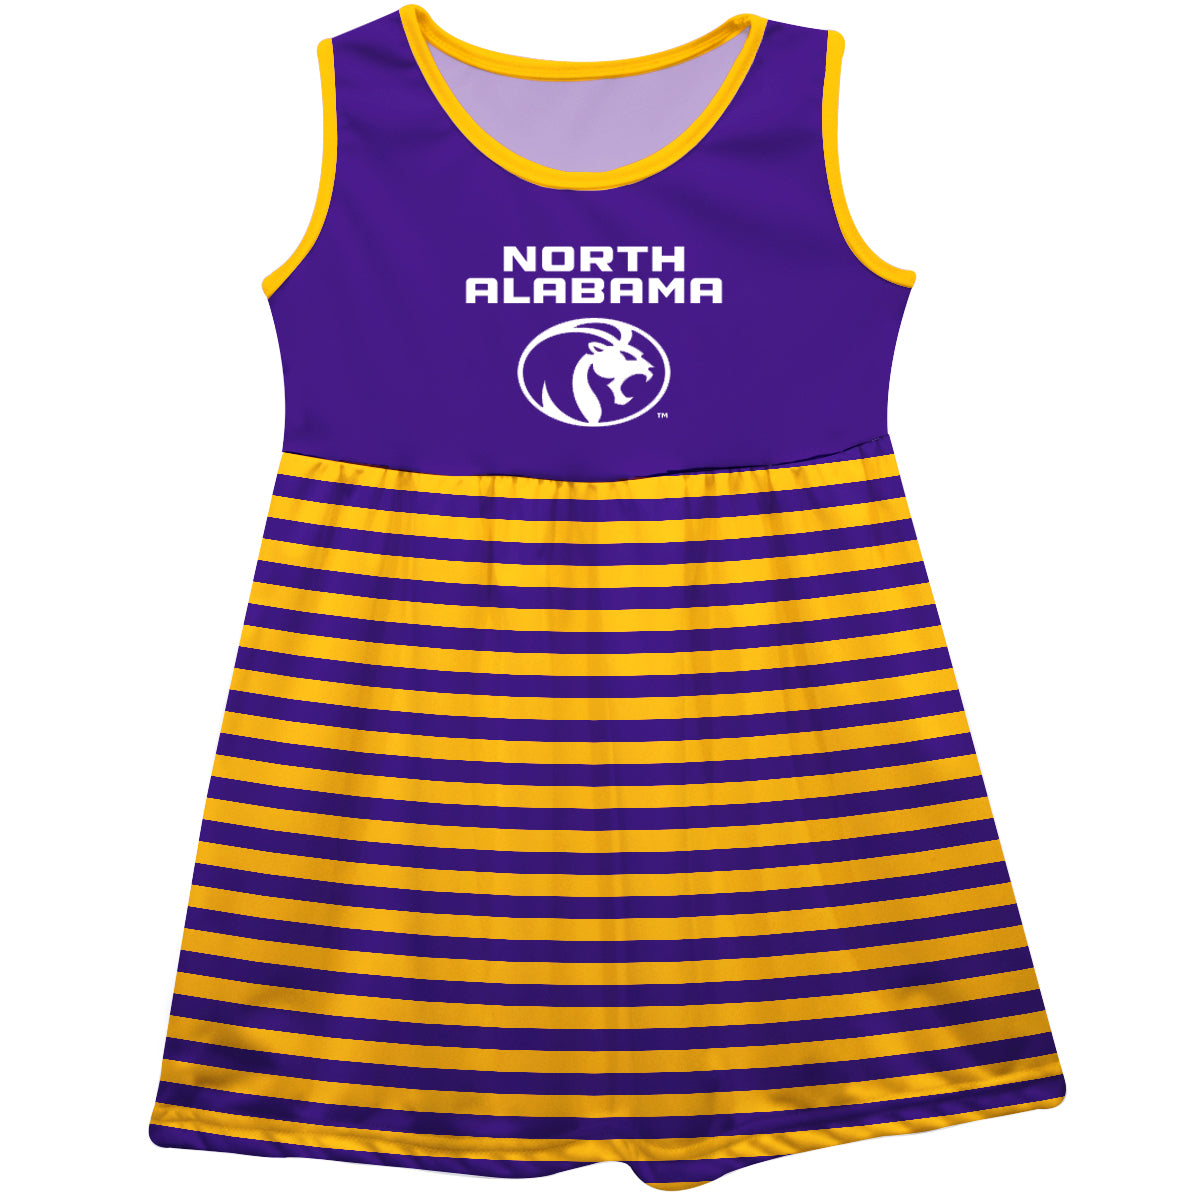 North Alabama Lions Girls Game Day Sleeveless Tank Dress Solid Purple Logo Stripes on Skirt by Vive La Fete